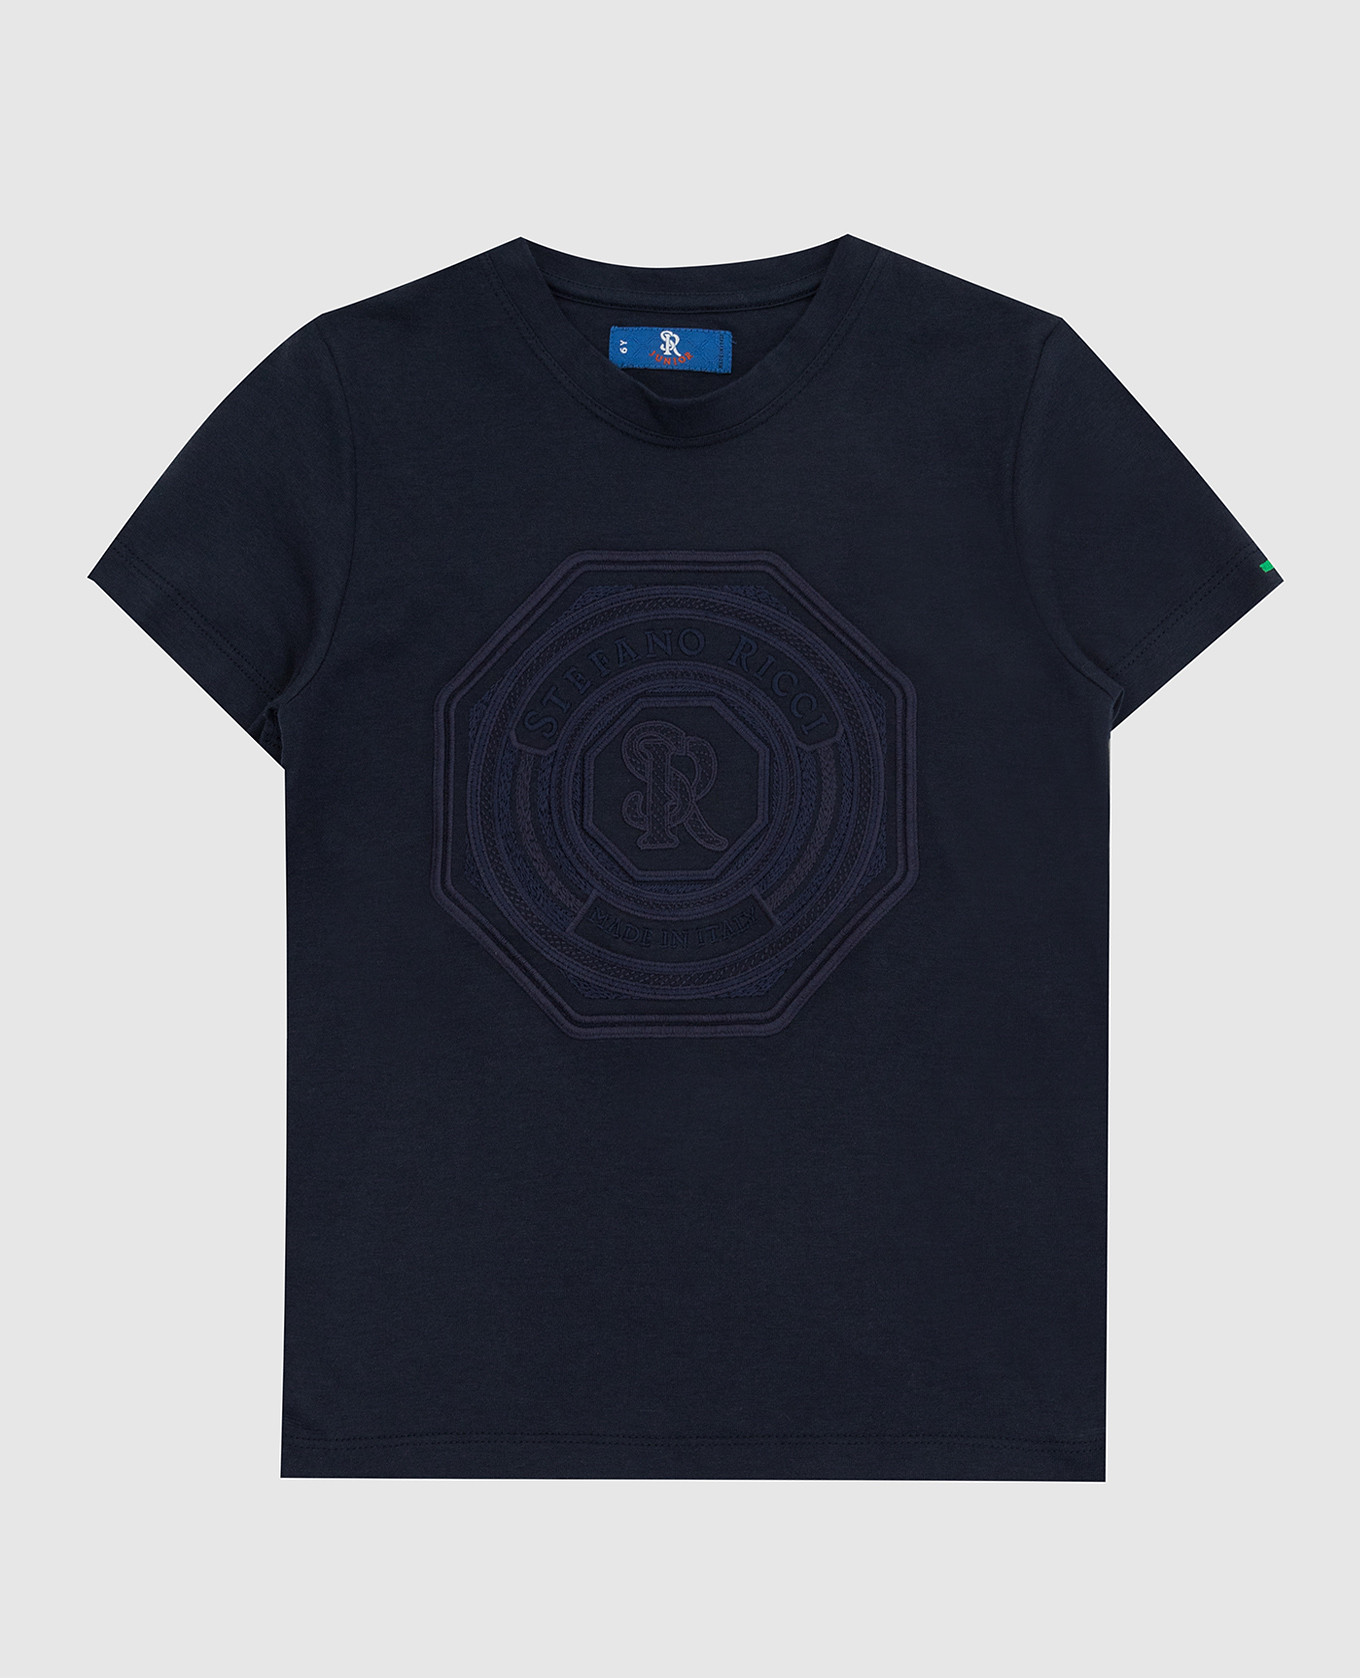 Children's navy blue t-shirt with monogram embroidery